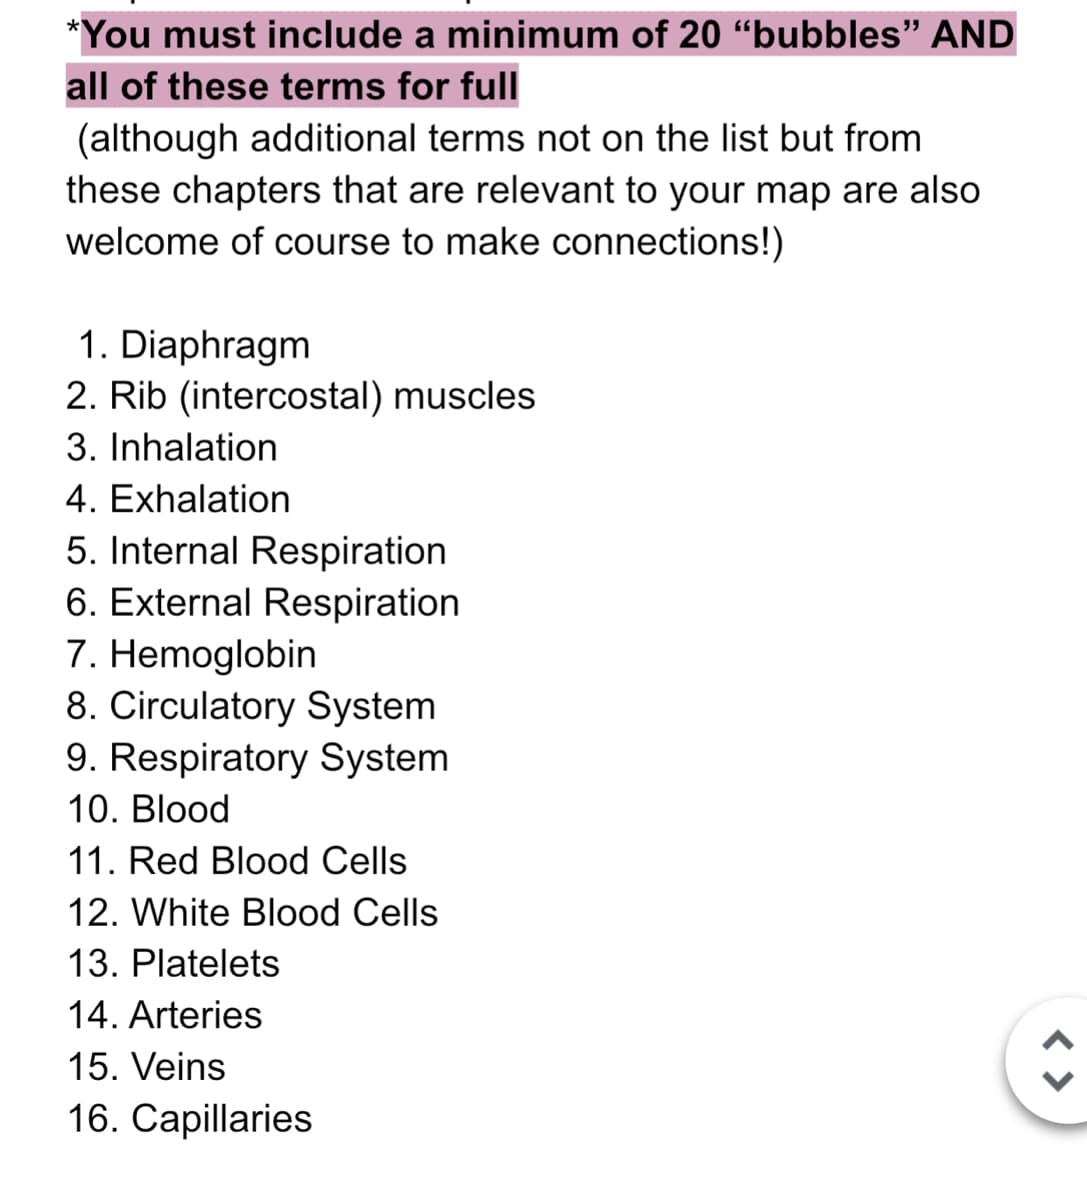 *You must include a minimum of 20 "bubbles" AND
all of these terms for full
(although additional terms not on the list but from
these chapters that are relevant to your map are also
welcome of course to make connections!)
1. Diaphragm
2. Rib (intercostal) muscles
3. Inhalation
4. Exhalation
5. Internal Respiration
6. External Respiration
7. Hemoglobin
8. Circulatory System
9. Respiratory System
10. Blood
11. Red Blood Cells
12. White Blood Cells
13. Platelets
14. Arteries
15. Veins
16. Capillaries
< >
